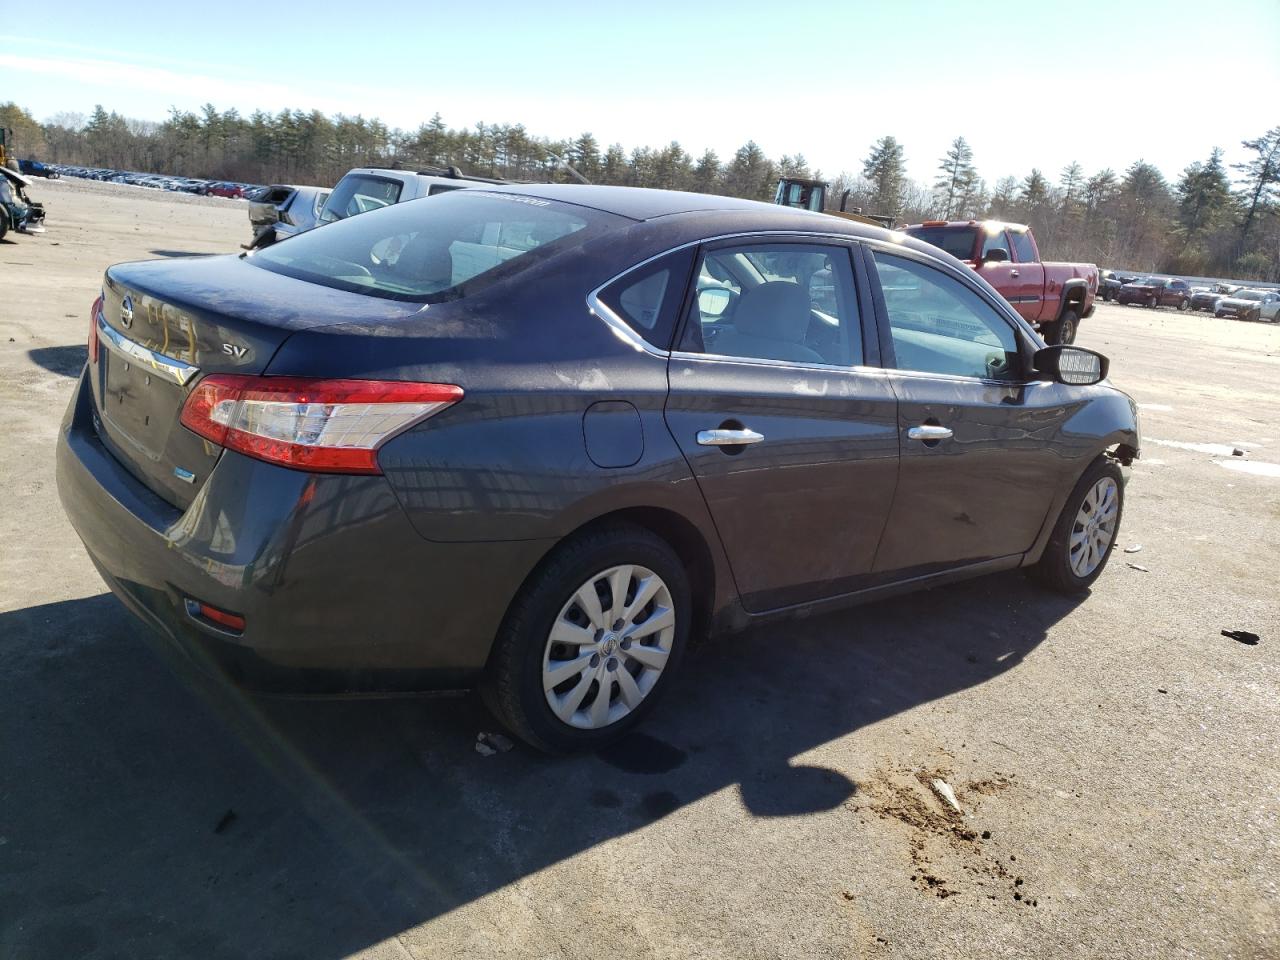 2014 Nissan Sentra S vin: 3N1AB7APXEY220877